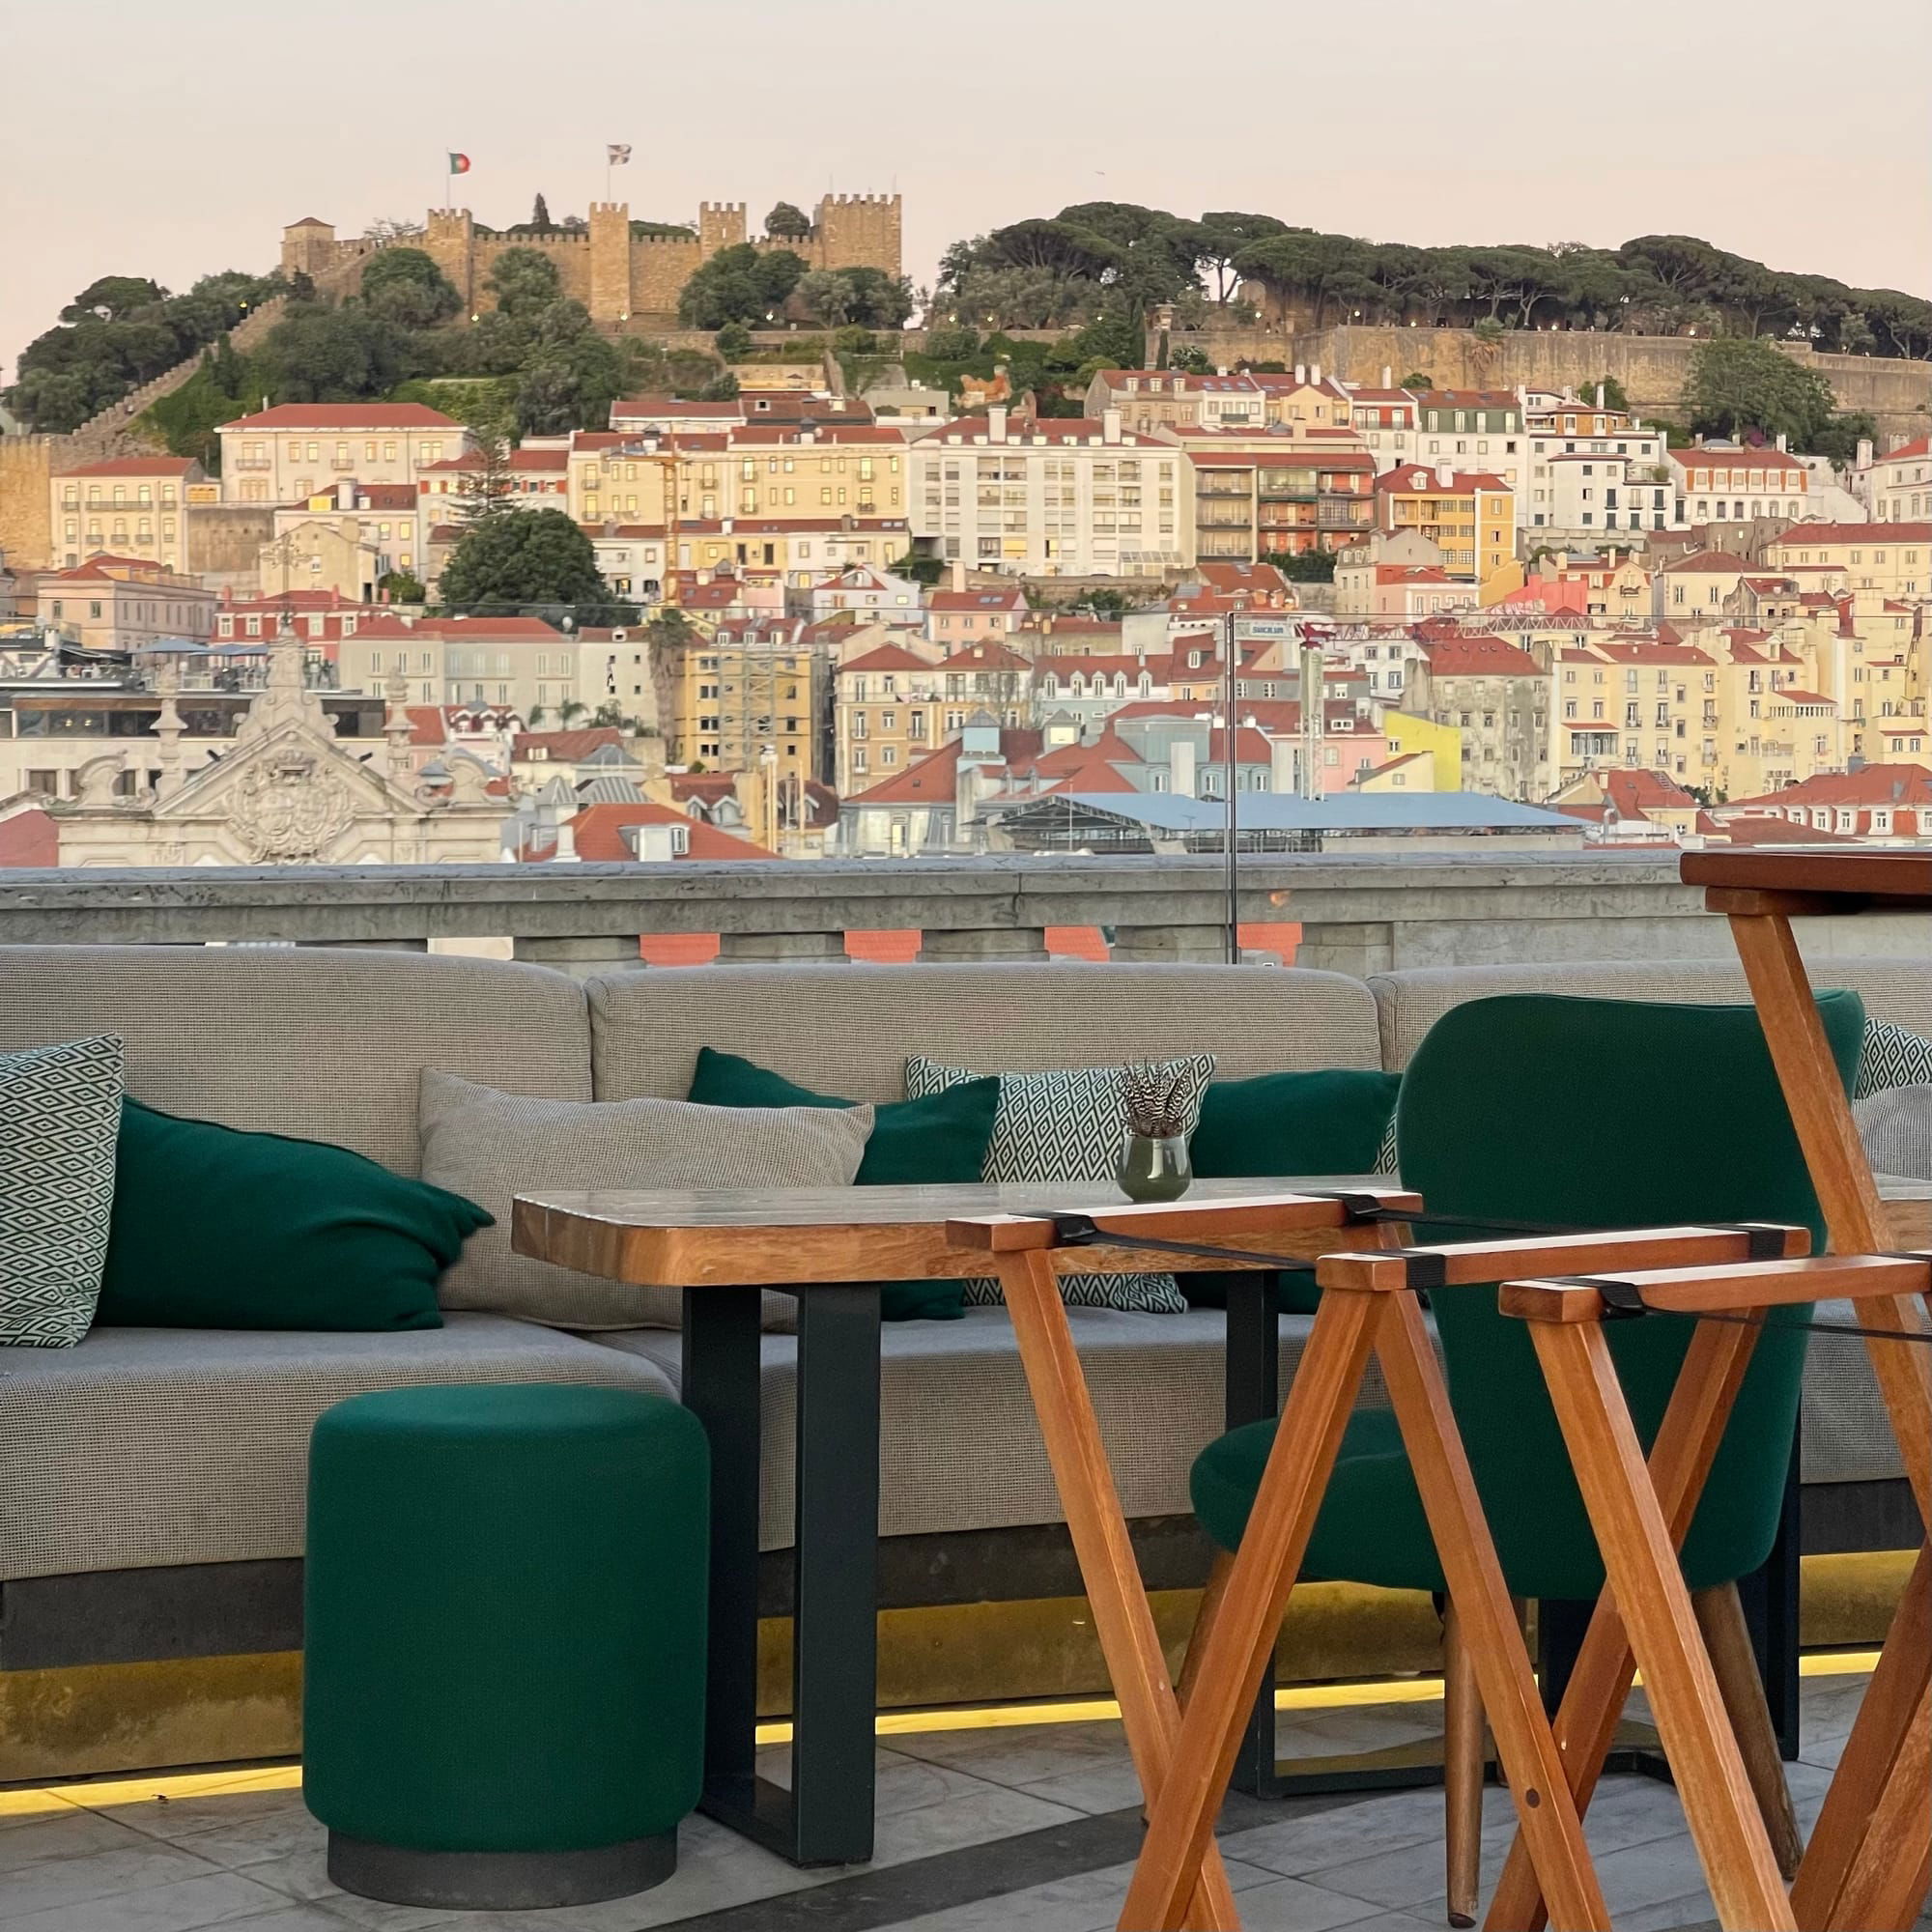 Five rooftop bars around downtown Lisbon